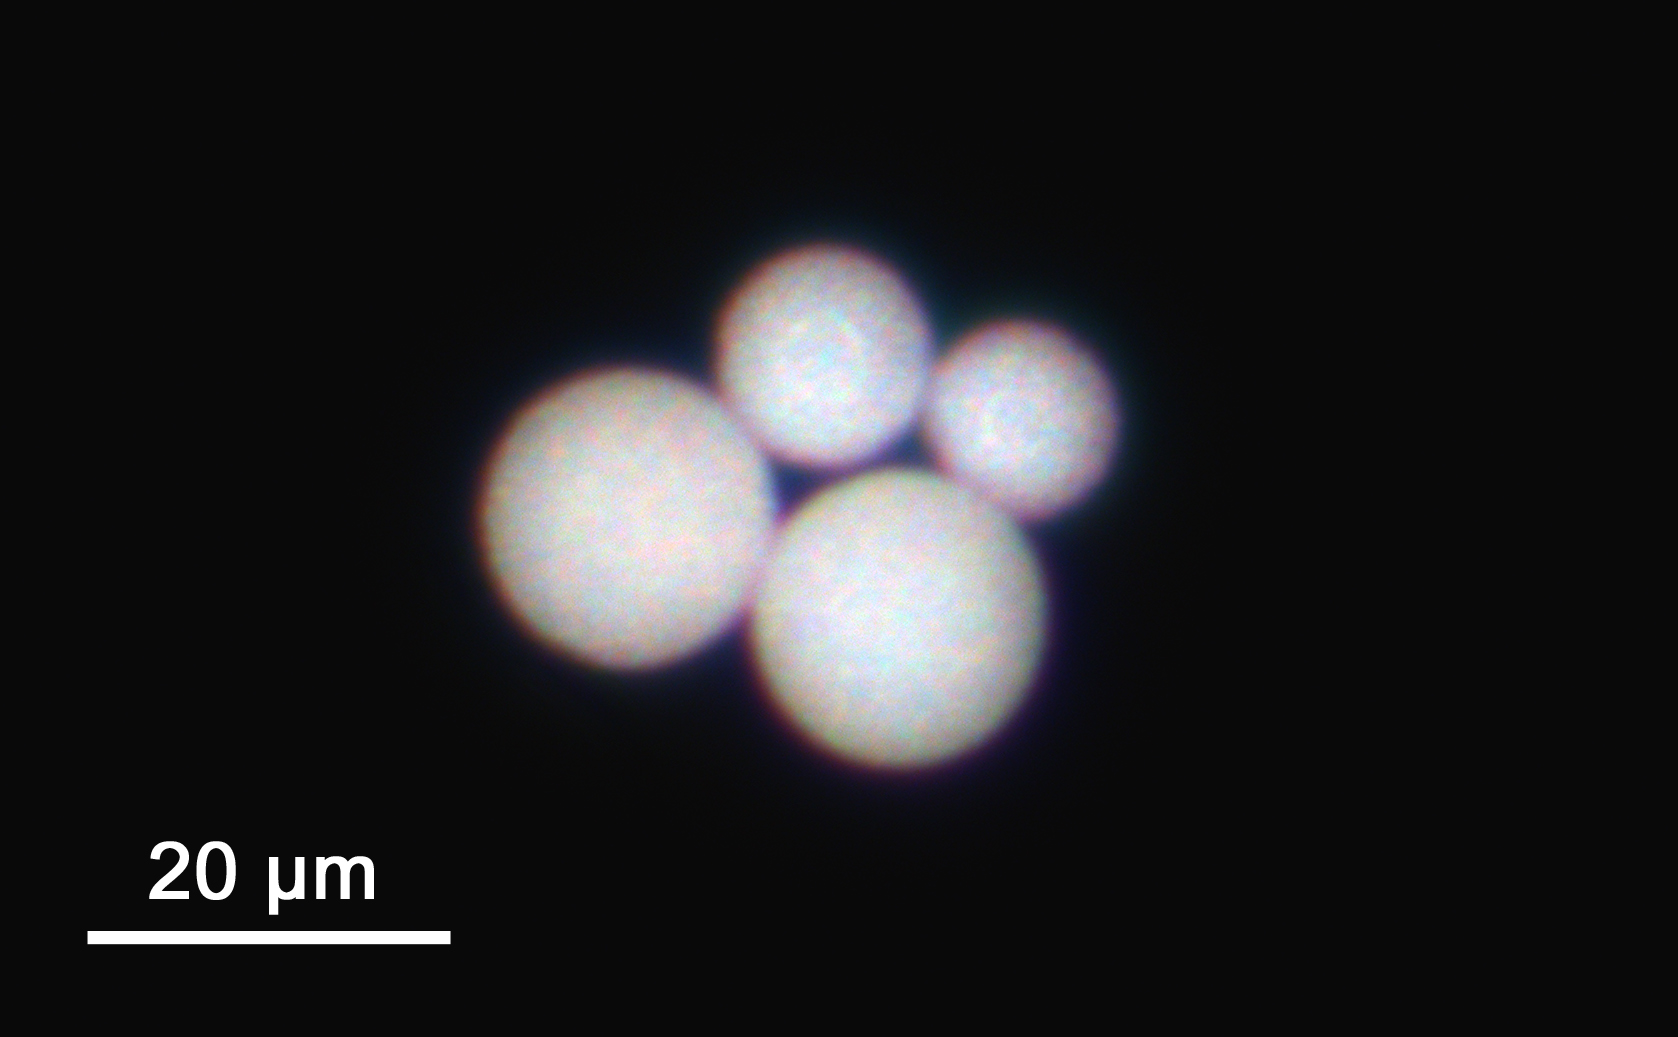 Four microballs with a diameter of about 10-20 micrometers made of lithium niobate nanocrystals pictured by using the Darkfield microscope.